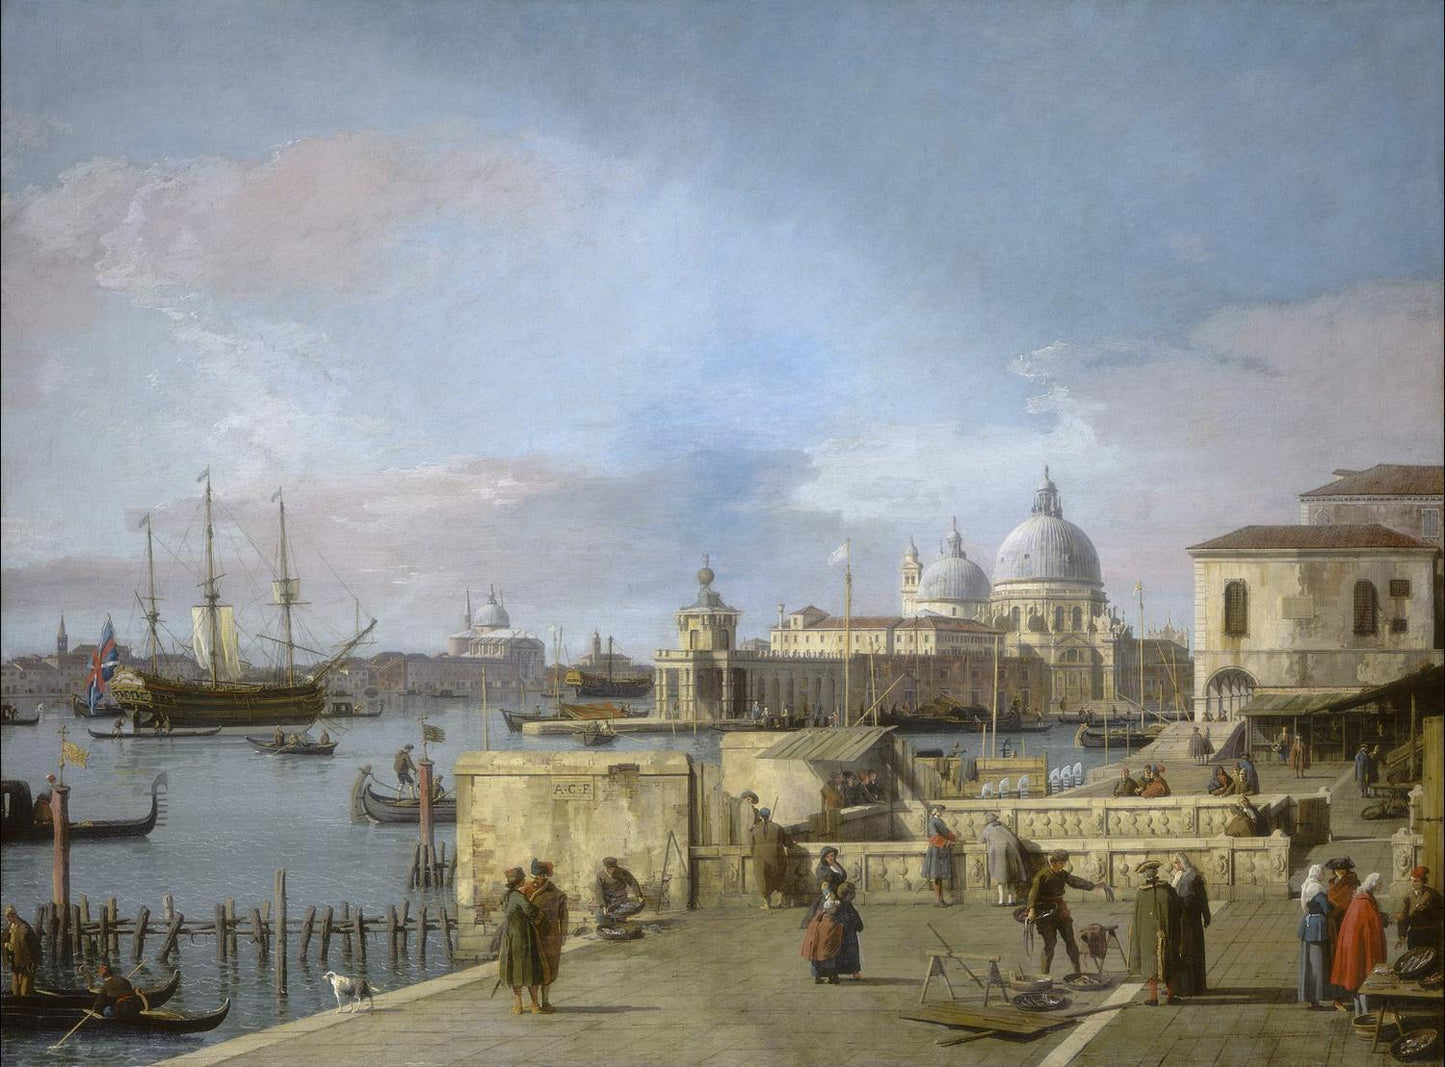 Entrance to the Grand Canal from the Molo, Venice, Canaletto